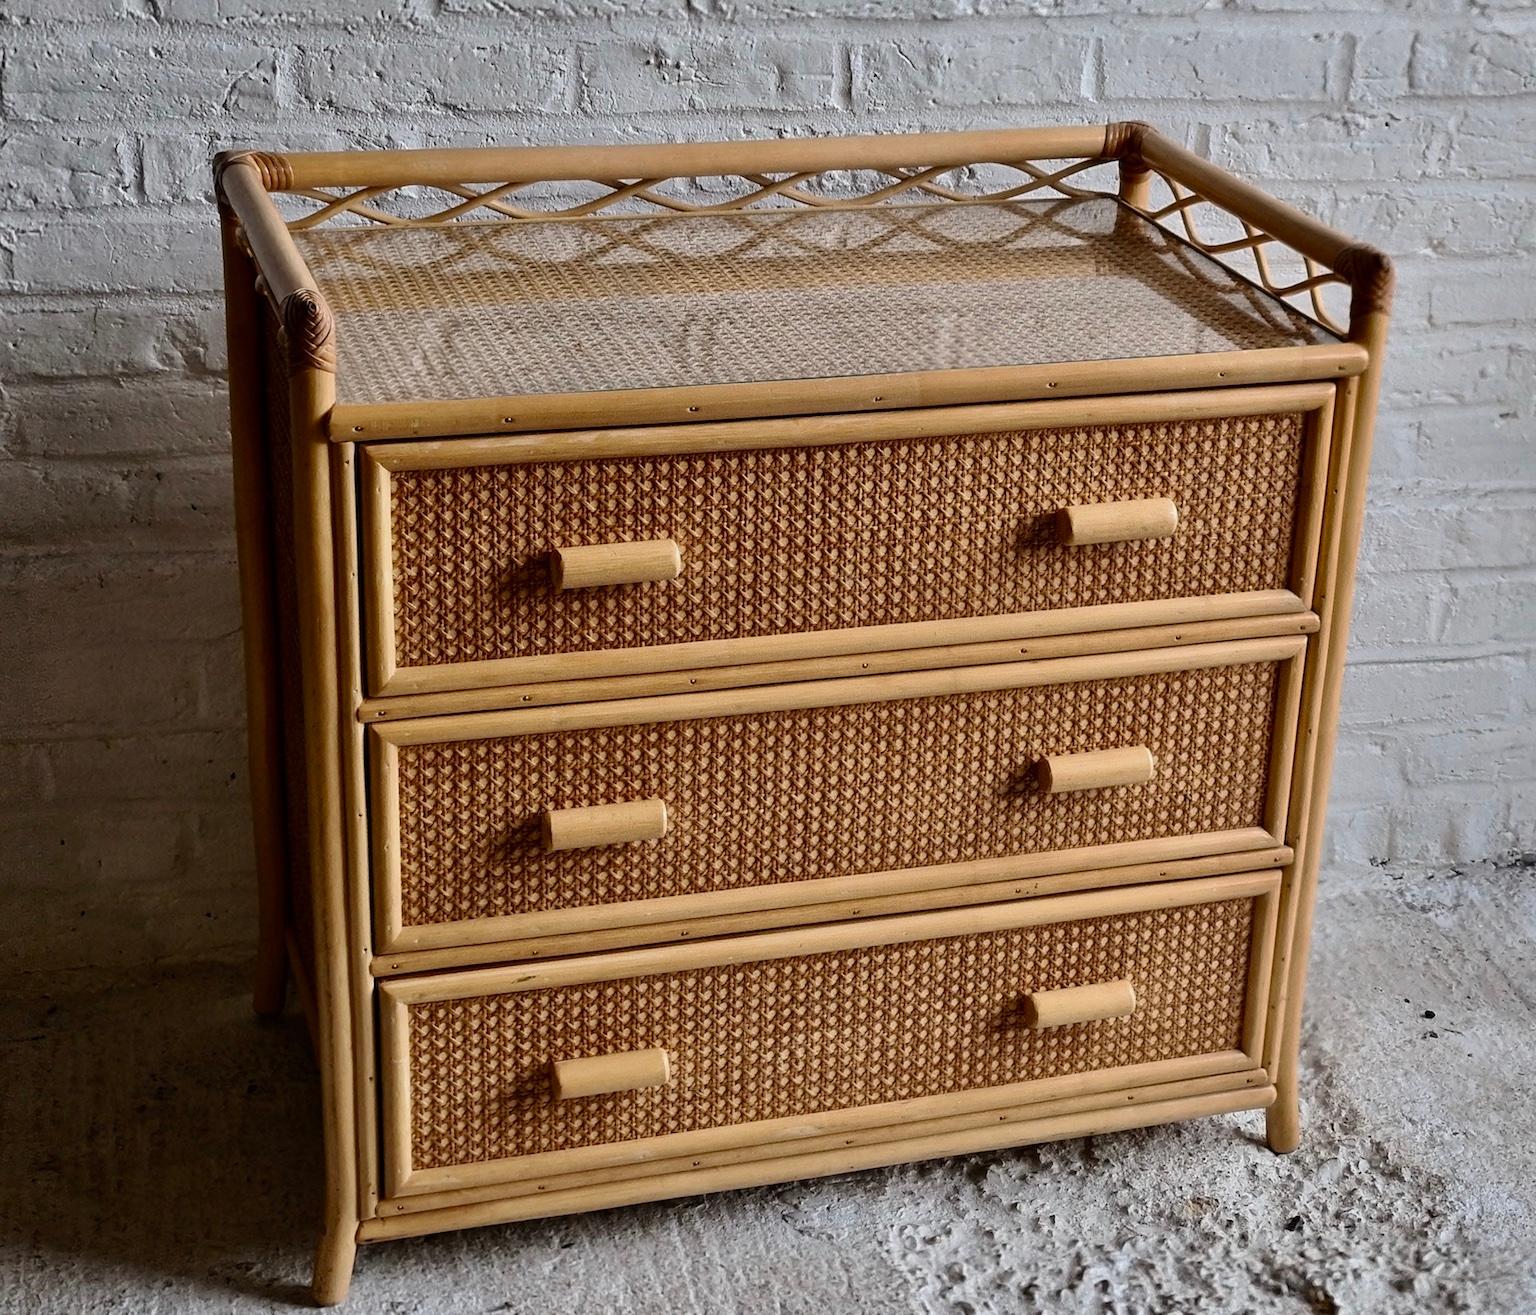 British Midcentury Rattan / Cane Chest of Drawers by Angraves, England, 1970s